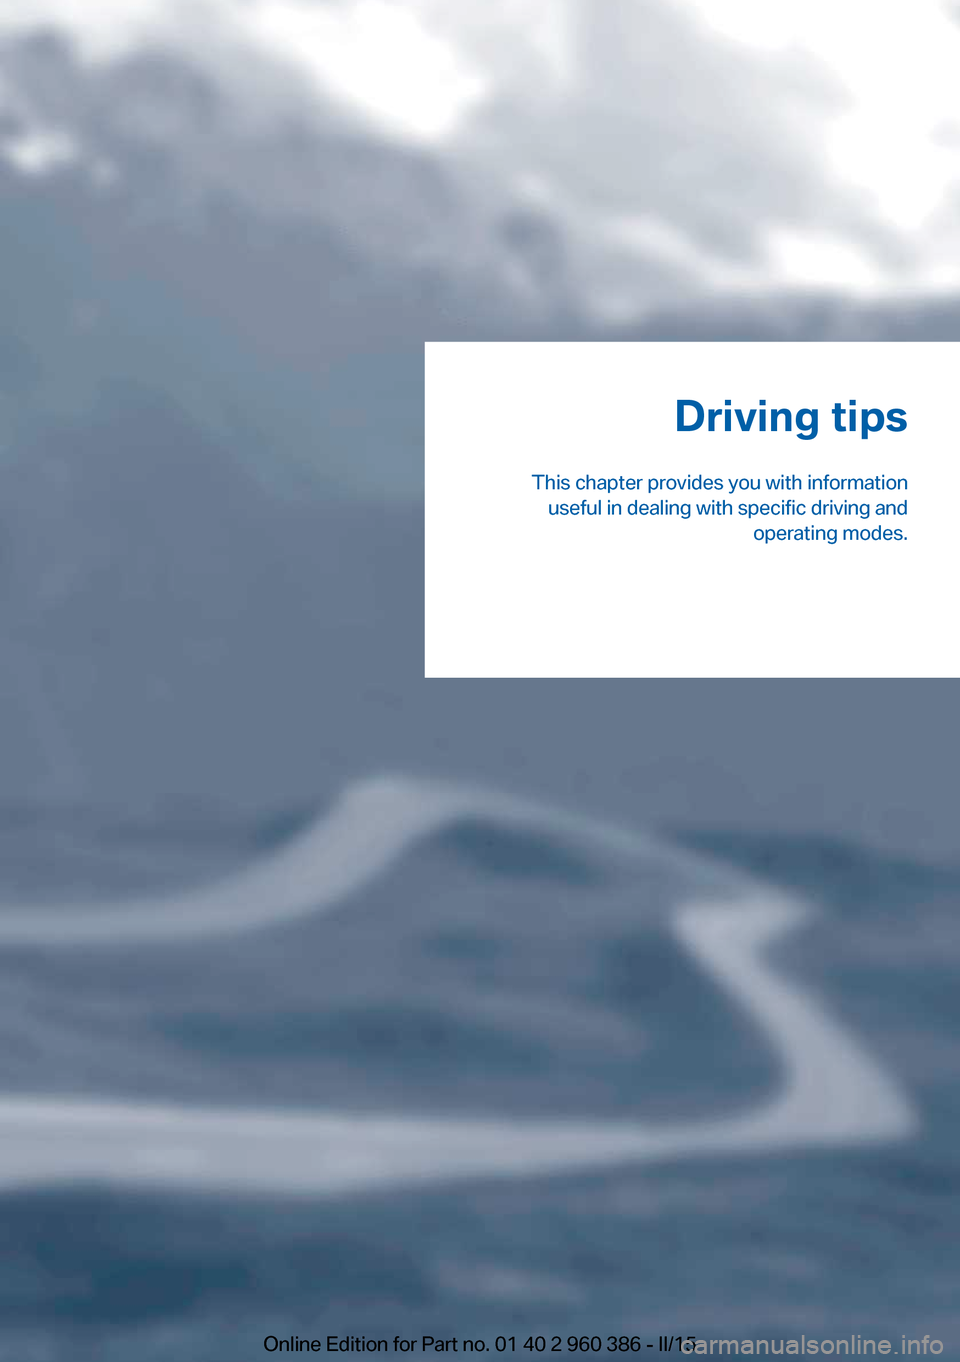 BMW X3 2015 F25 Owners Manual Driving tips
This chapter provides you with information useful in dealing with specific driving and operating modes.Online Edition for Part no. 01 40 2 960 386 - II/15 